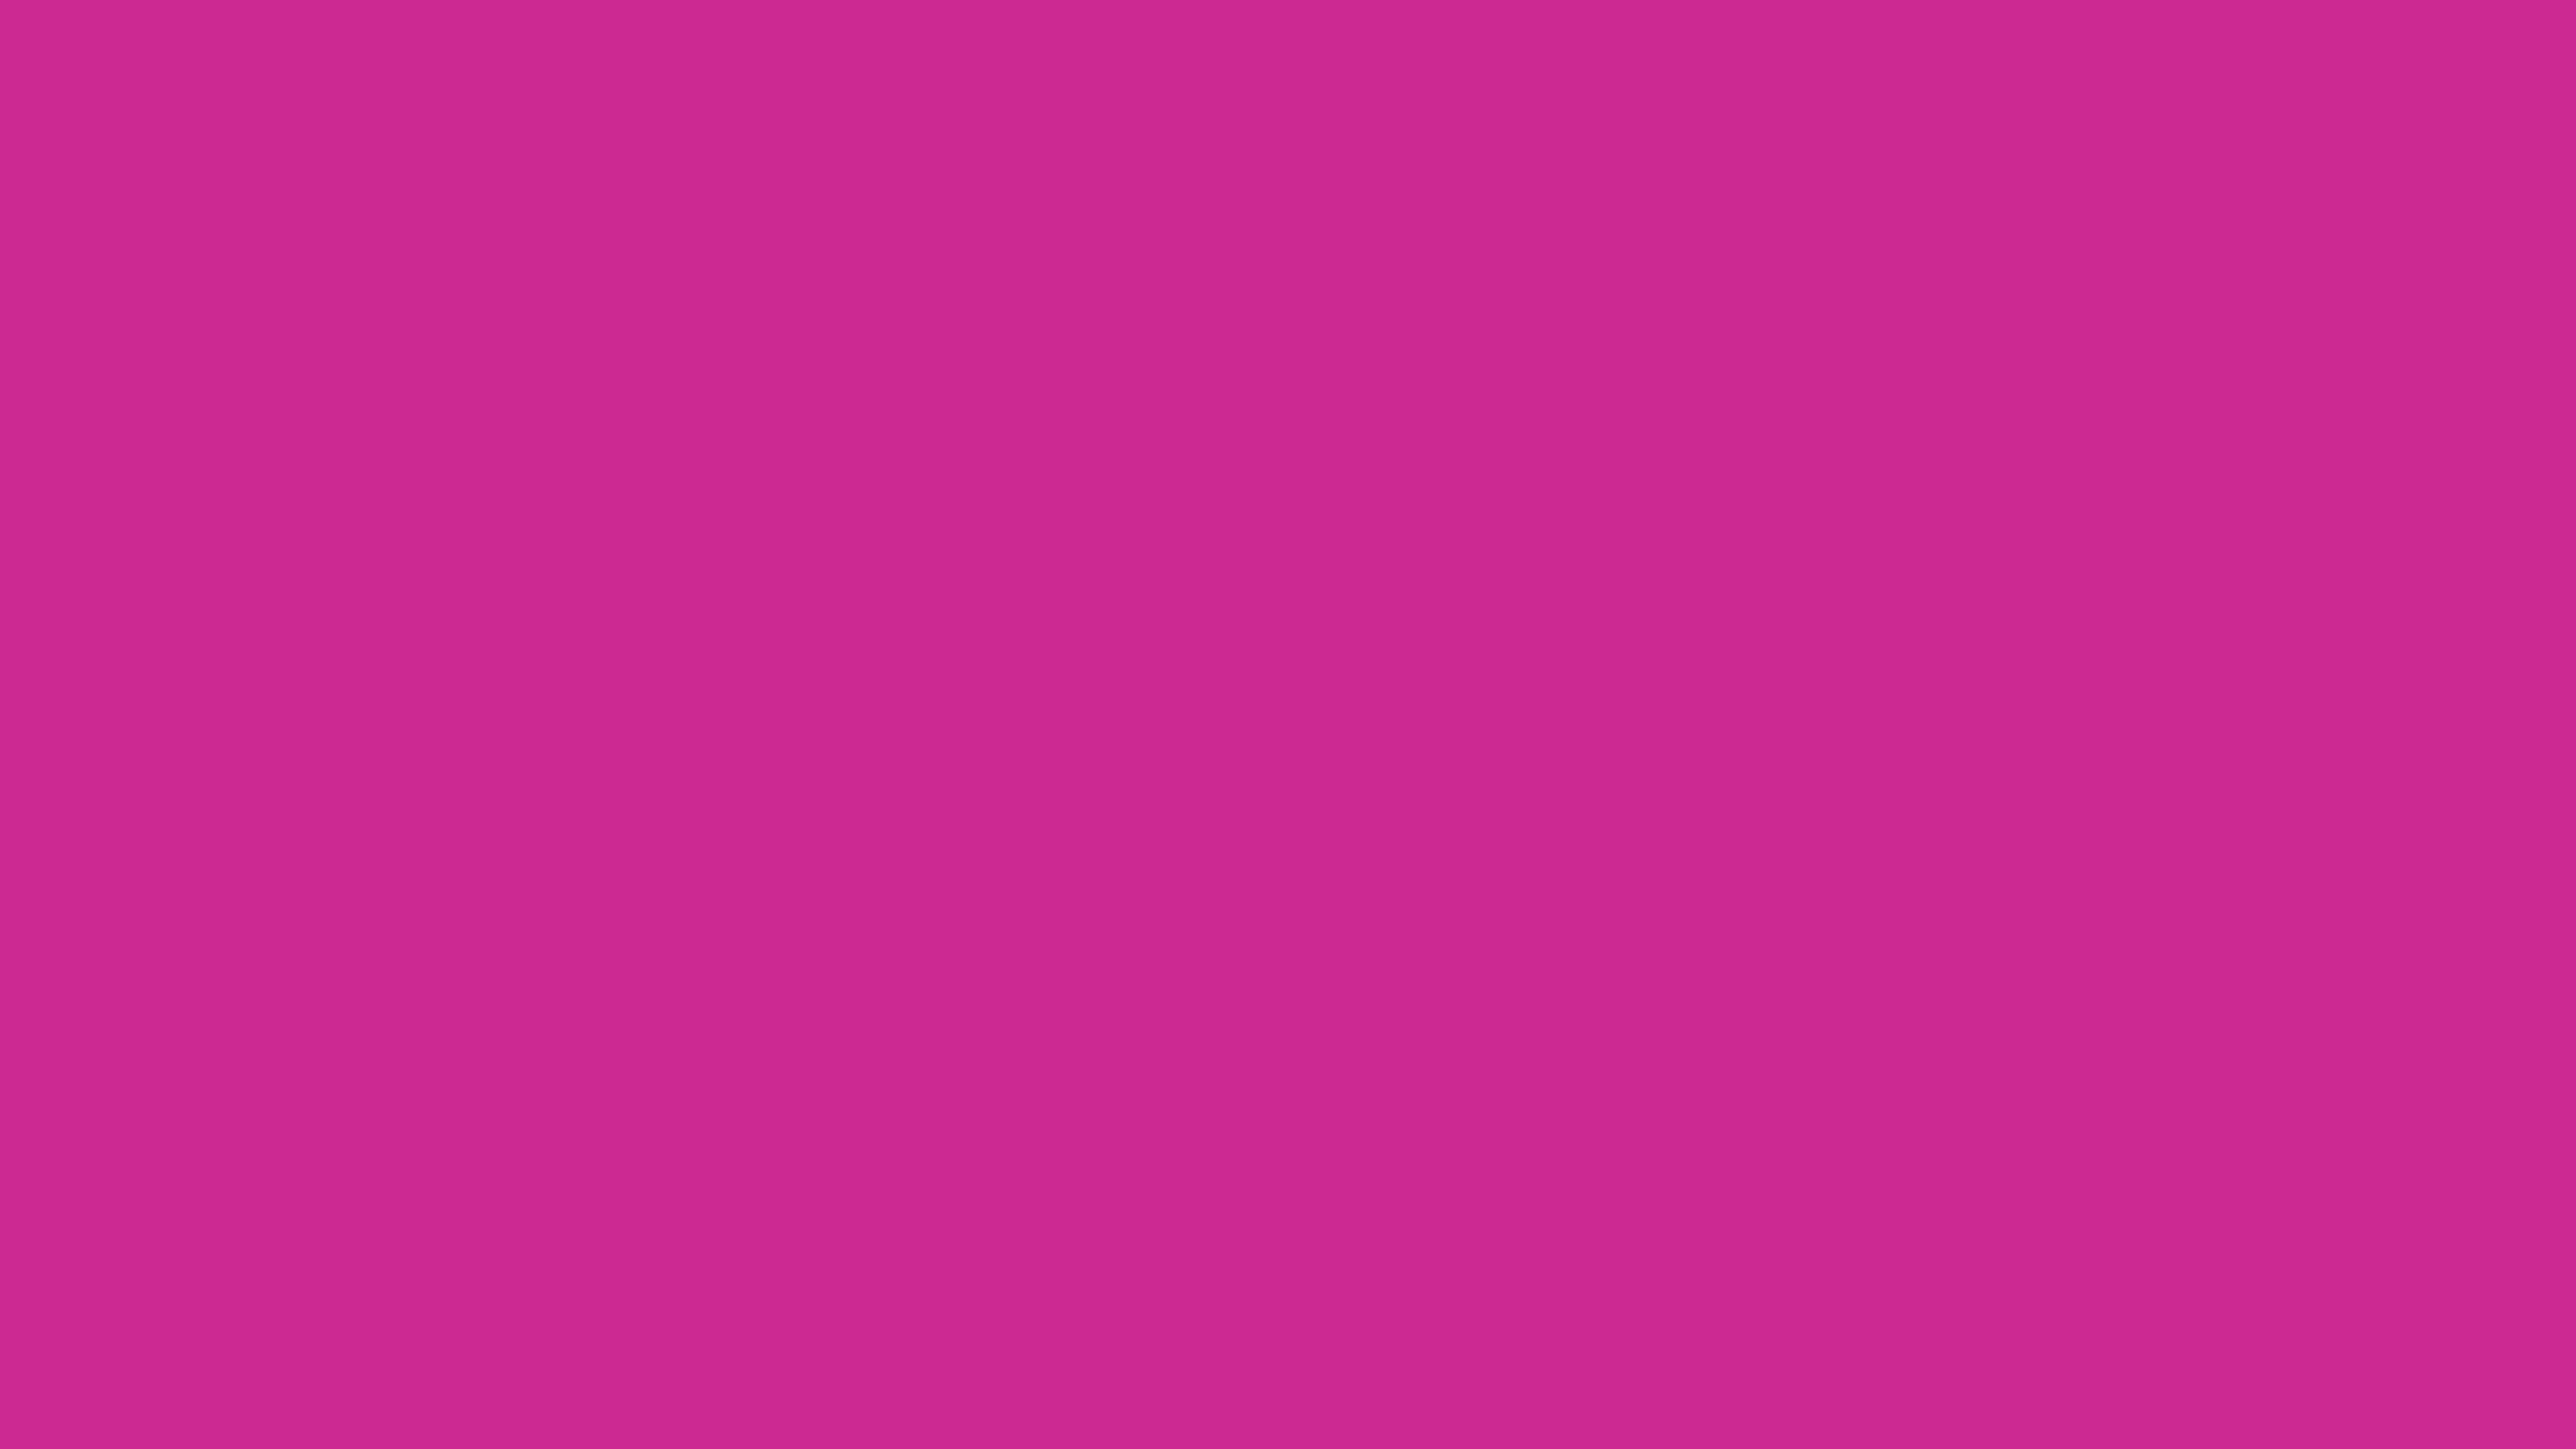 5120x2880 Royal Fuchsia Solid Color Background